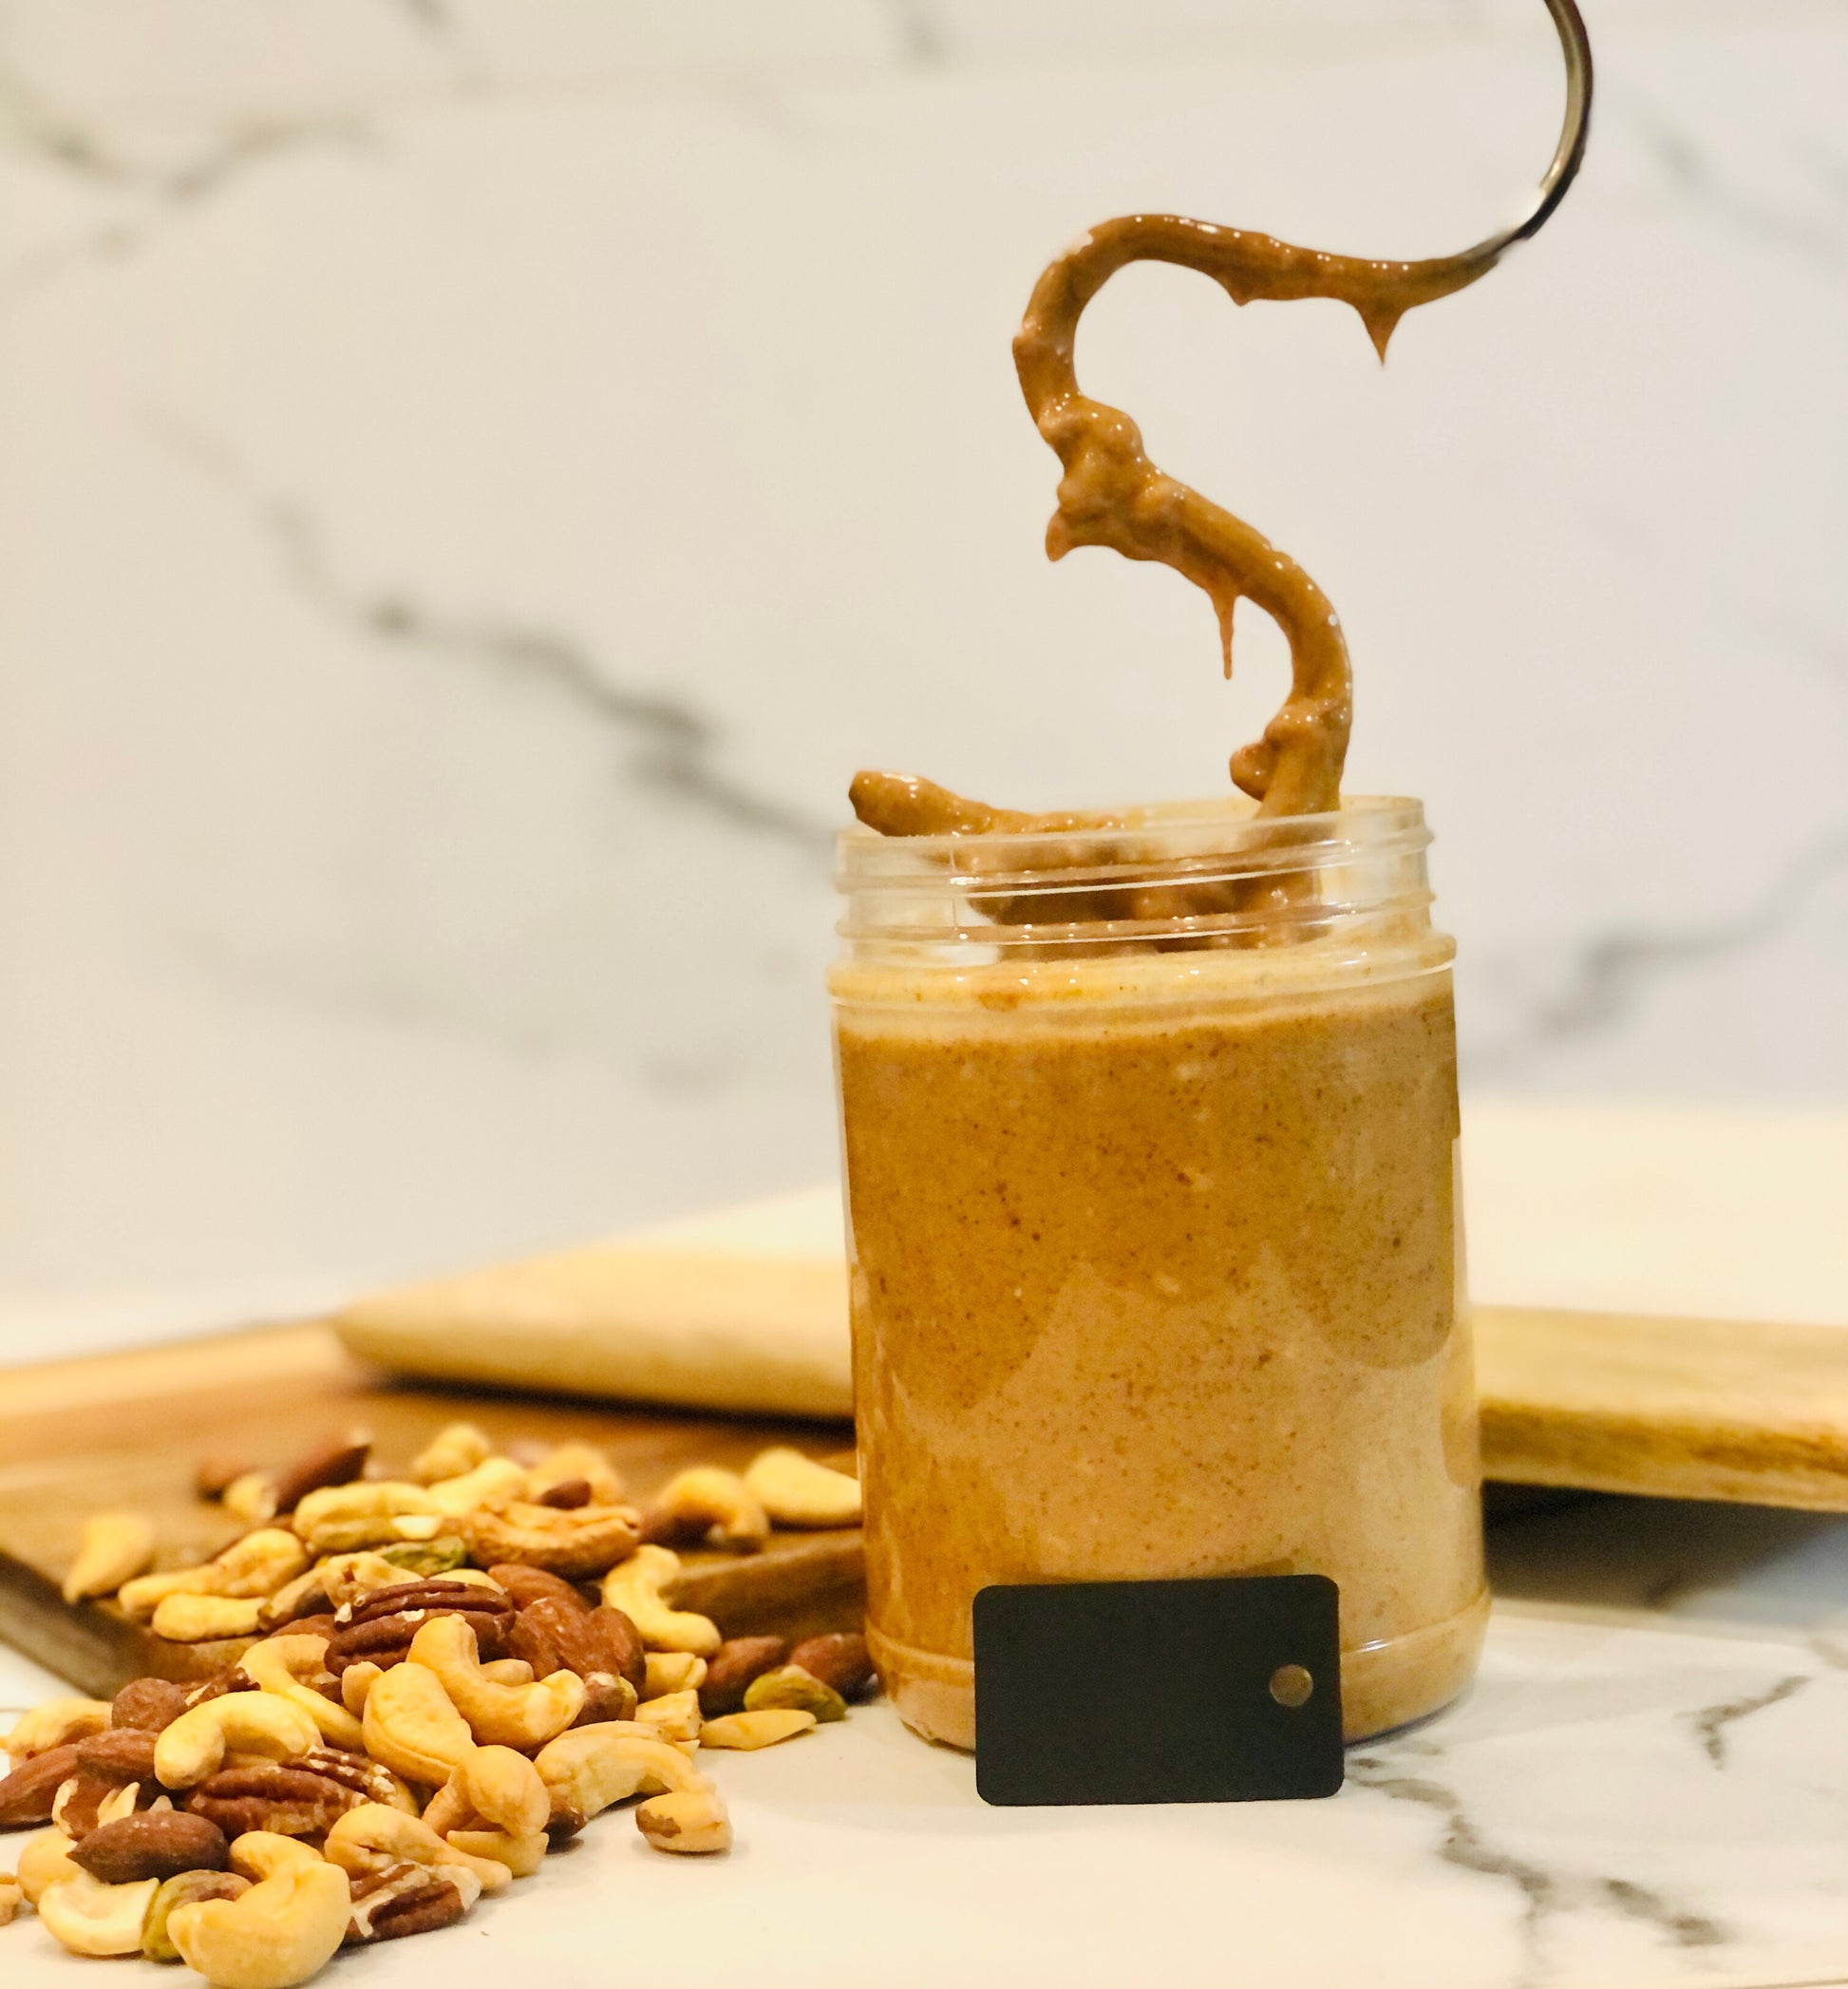 NutBustir natural nut butter mixer attaches to drills and hand mixers to  blend oils » Gadget Flow